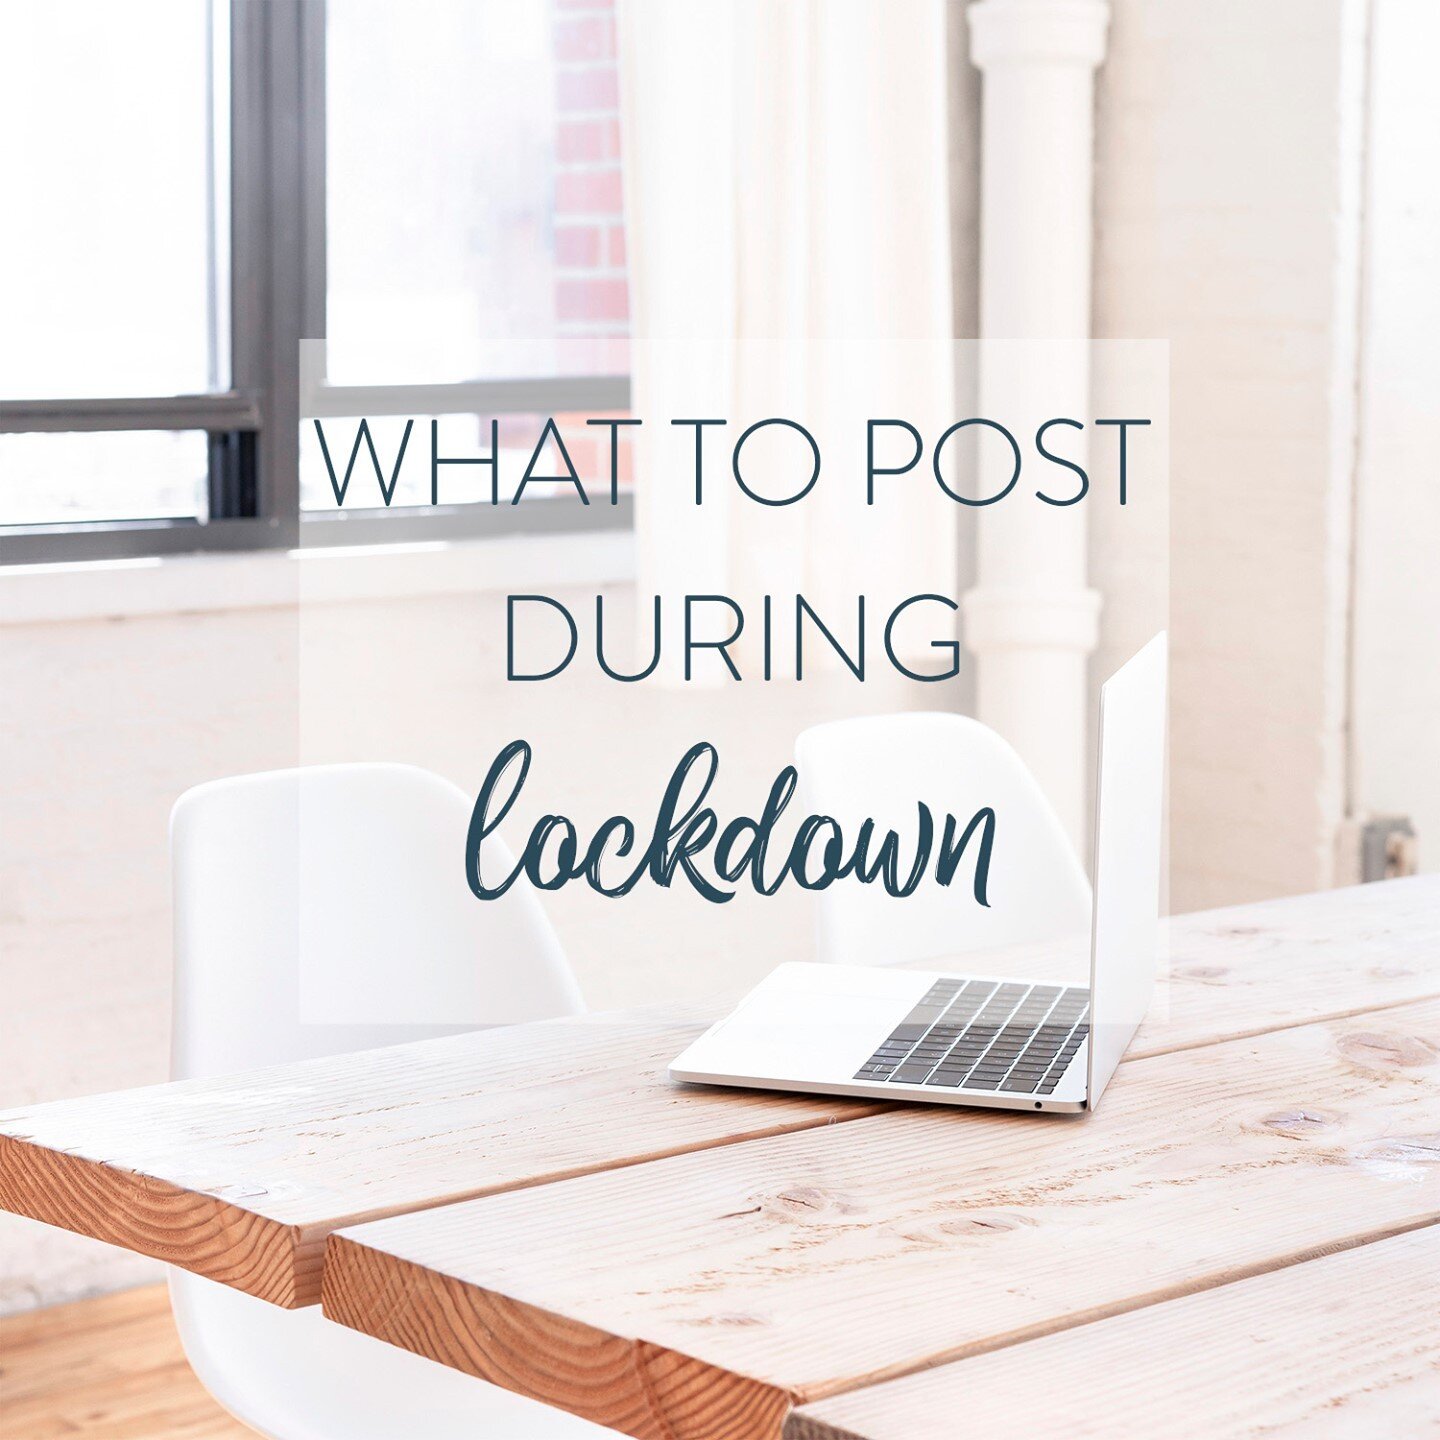 Hi everyone and happy Monday! I thought I'd pop in today with some ✨ quick tips ✨ on what to post on your brands social channels during lockdown. It just seems so relevant again right now with Germany being on lockdown &quot;light&quot; (and many oth